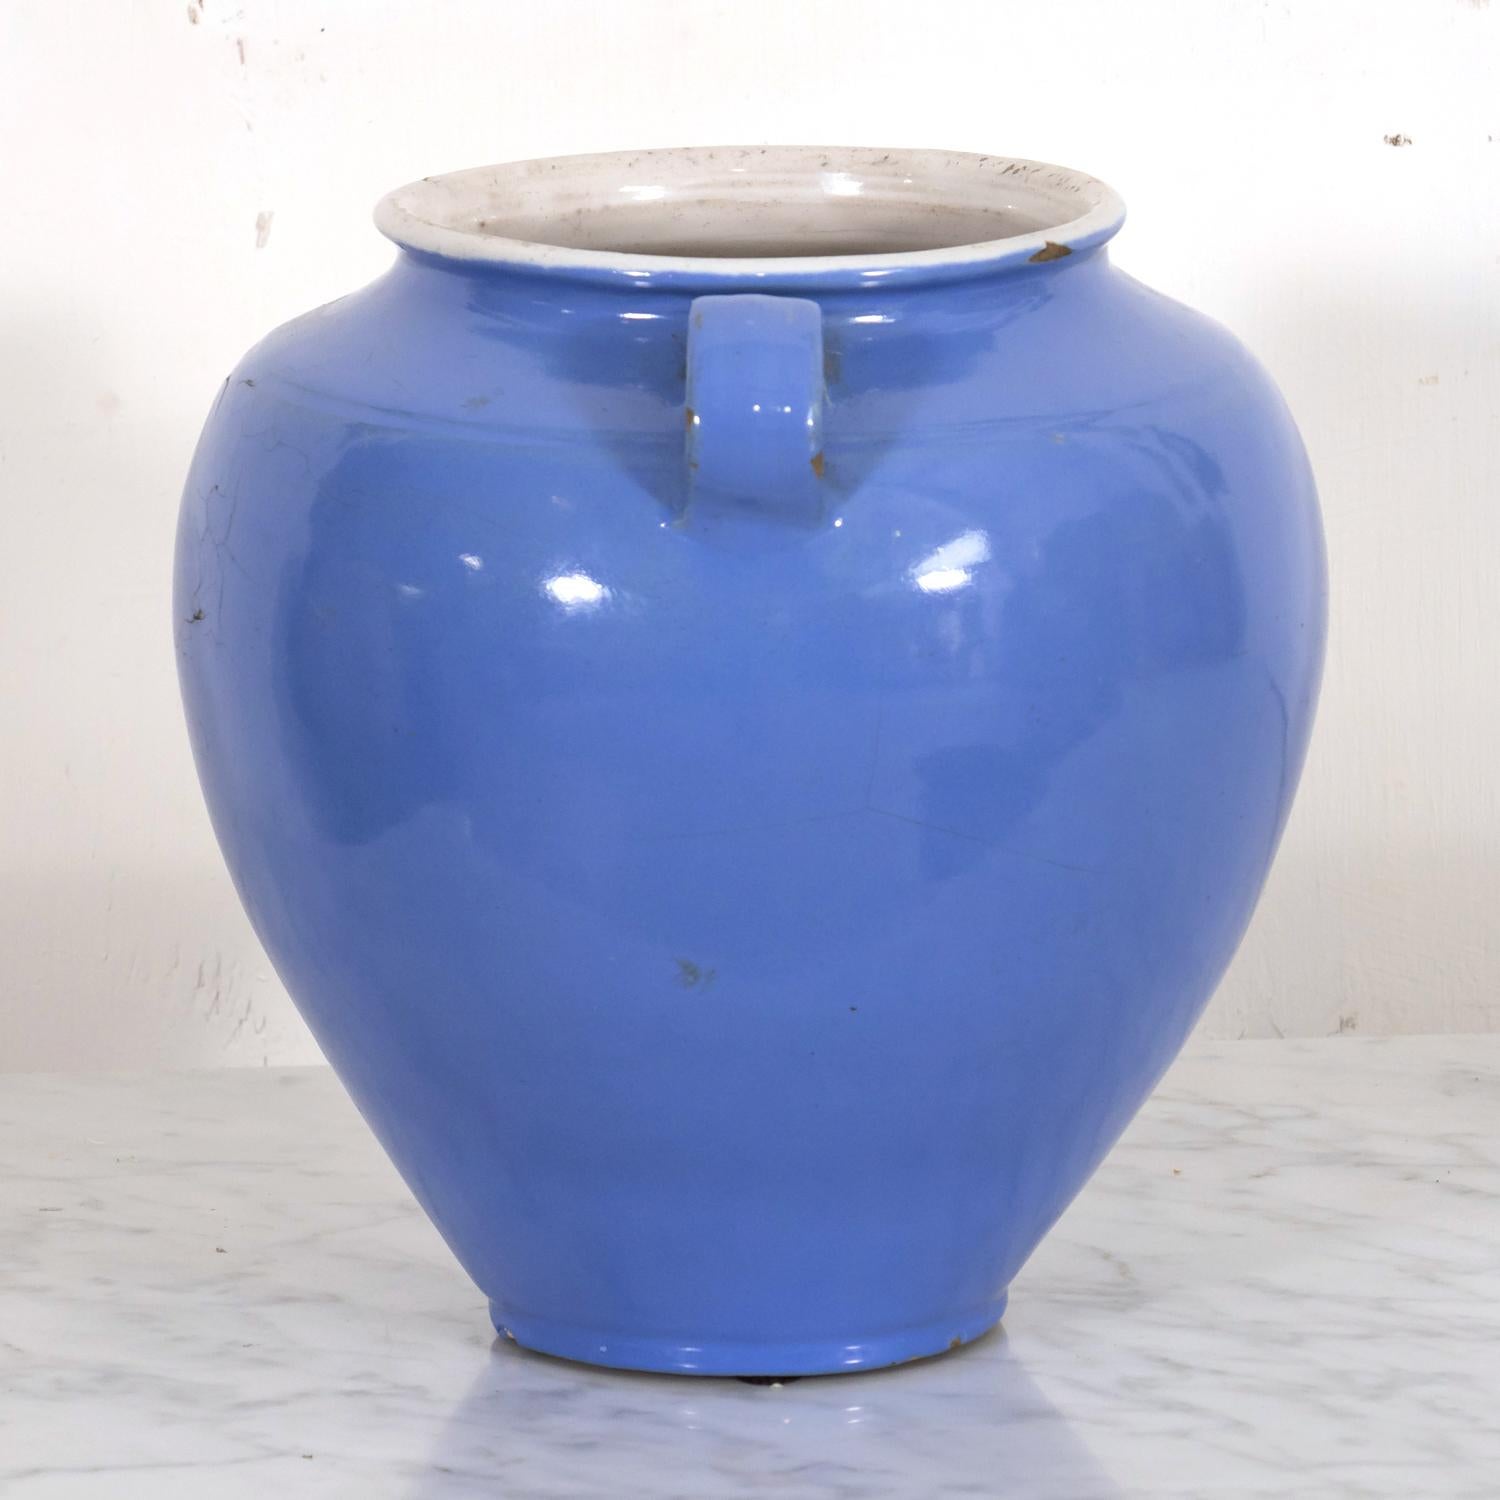 Late 19th Century Rare 19th Century French Confit Pot or Egg Pot with Blue Glaze For Sale